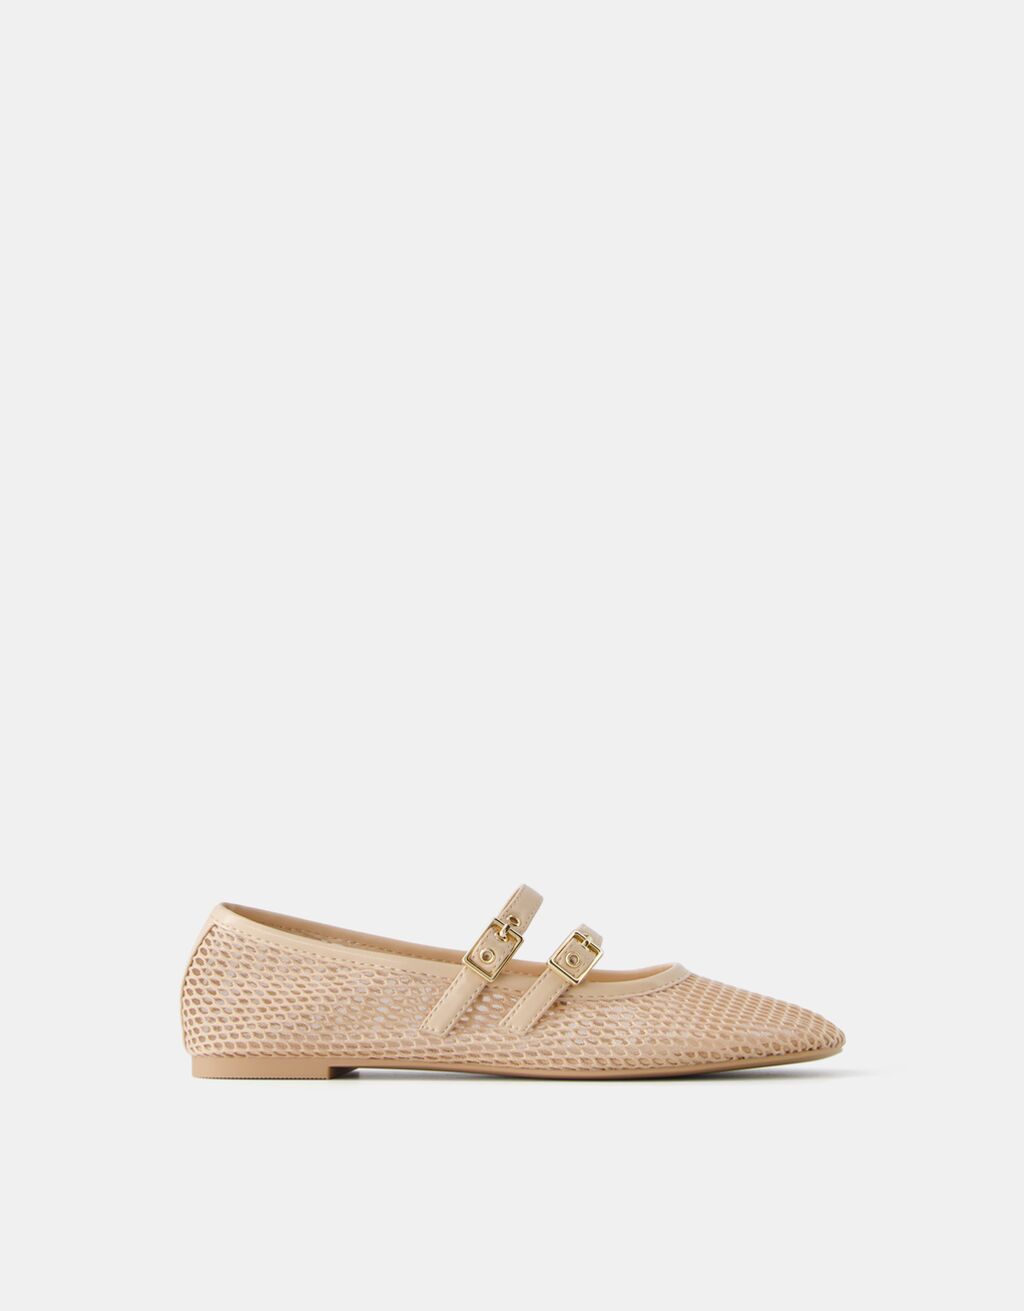 Mesh ballet flats with buckles